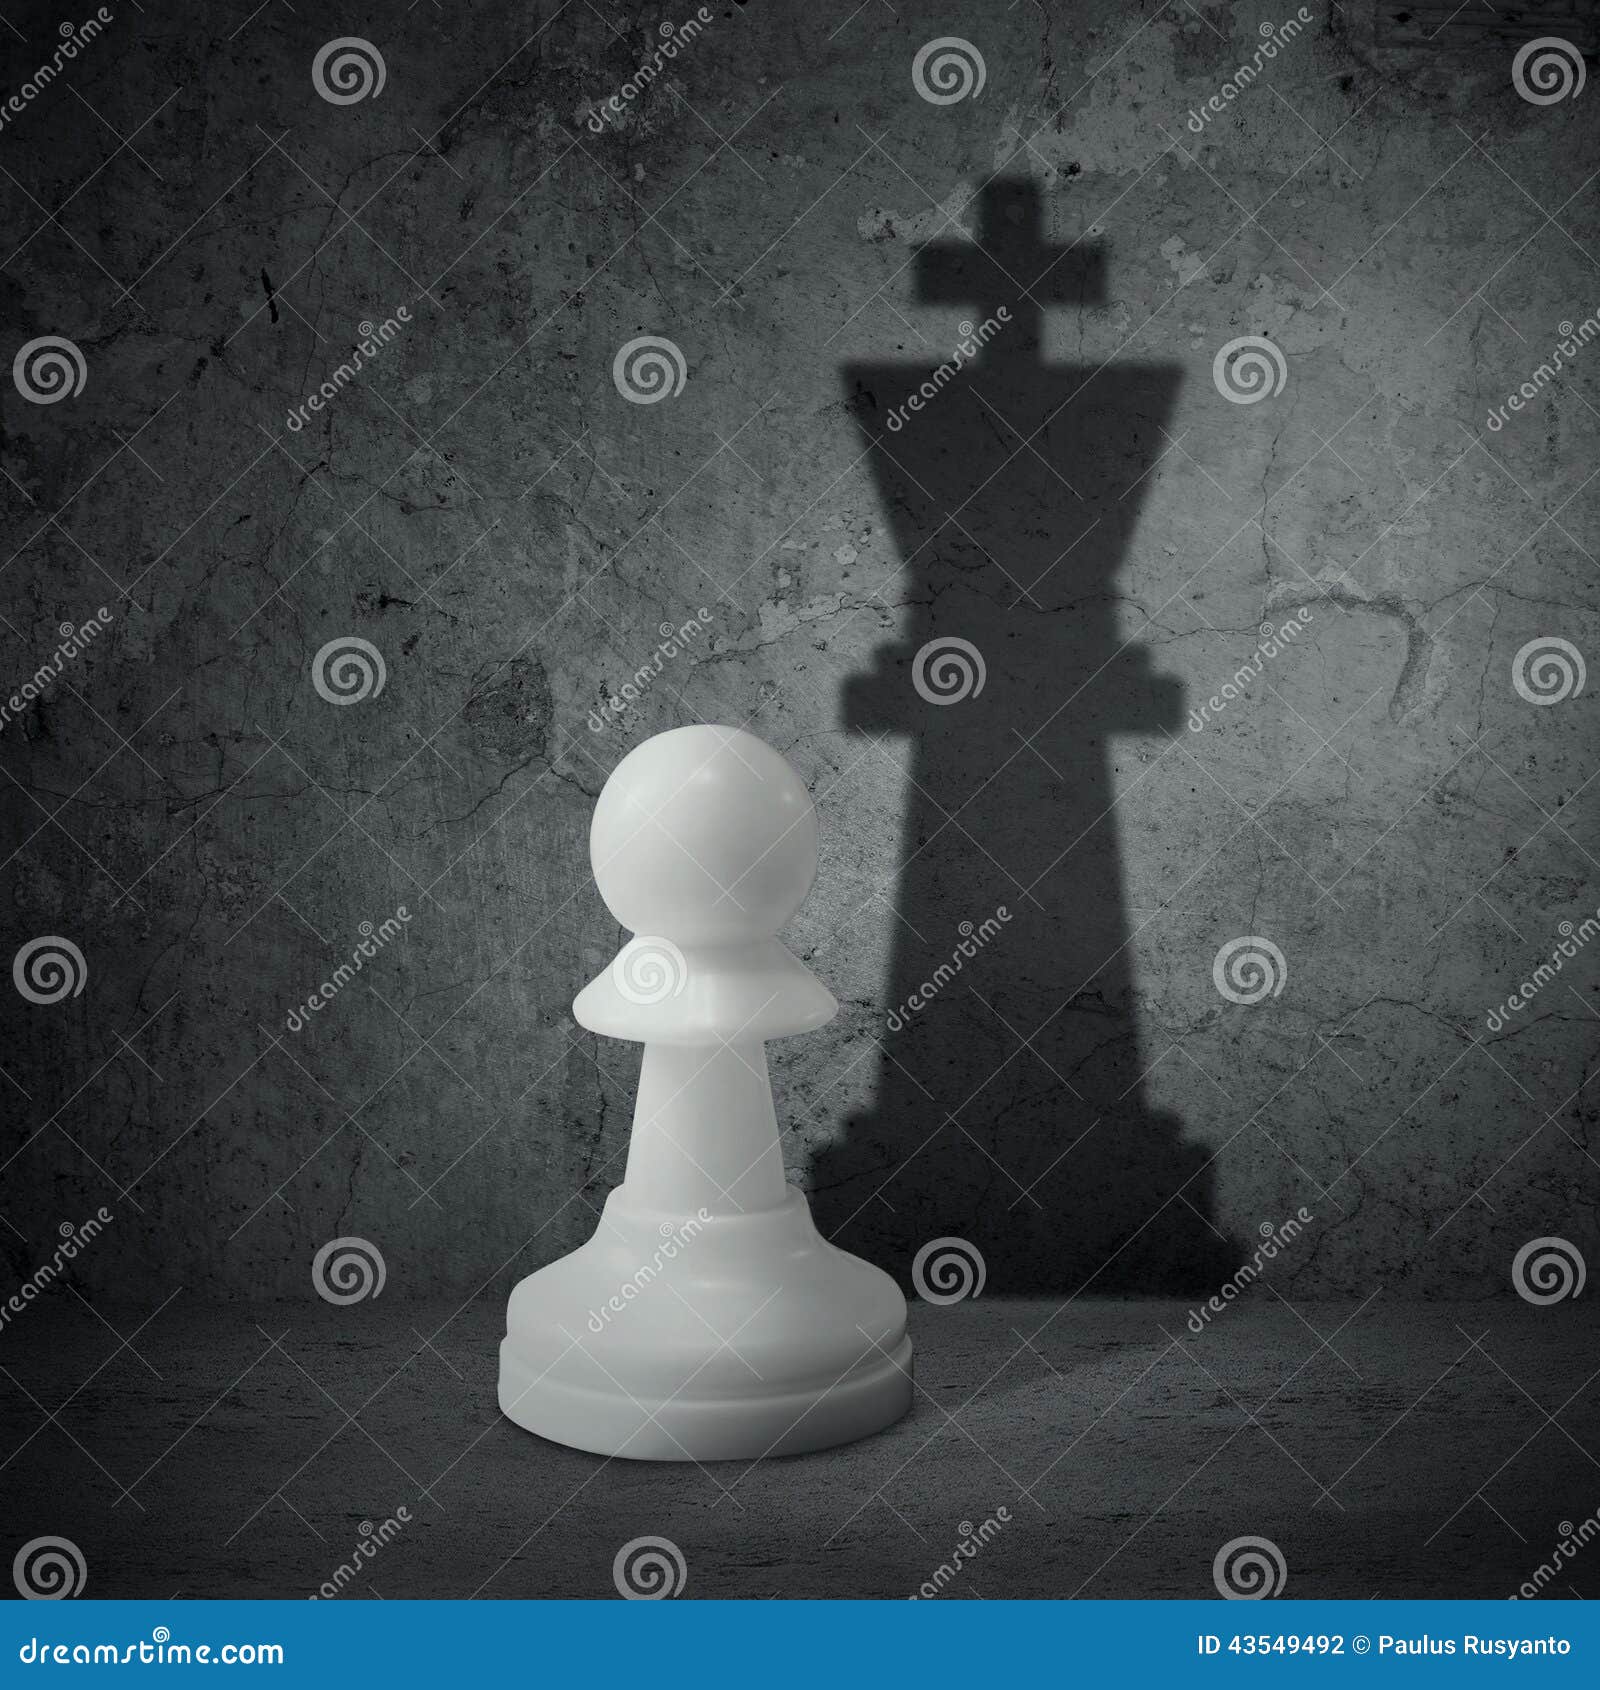 white chess pawn with shadow queen